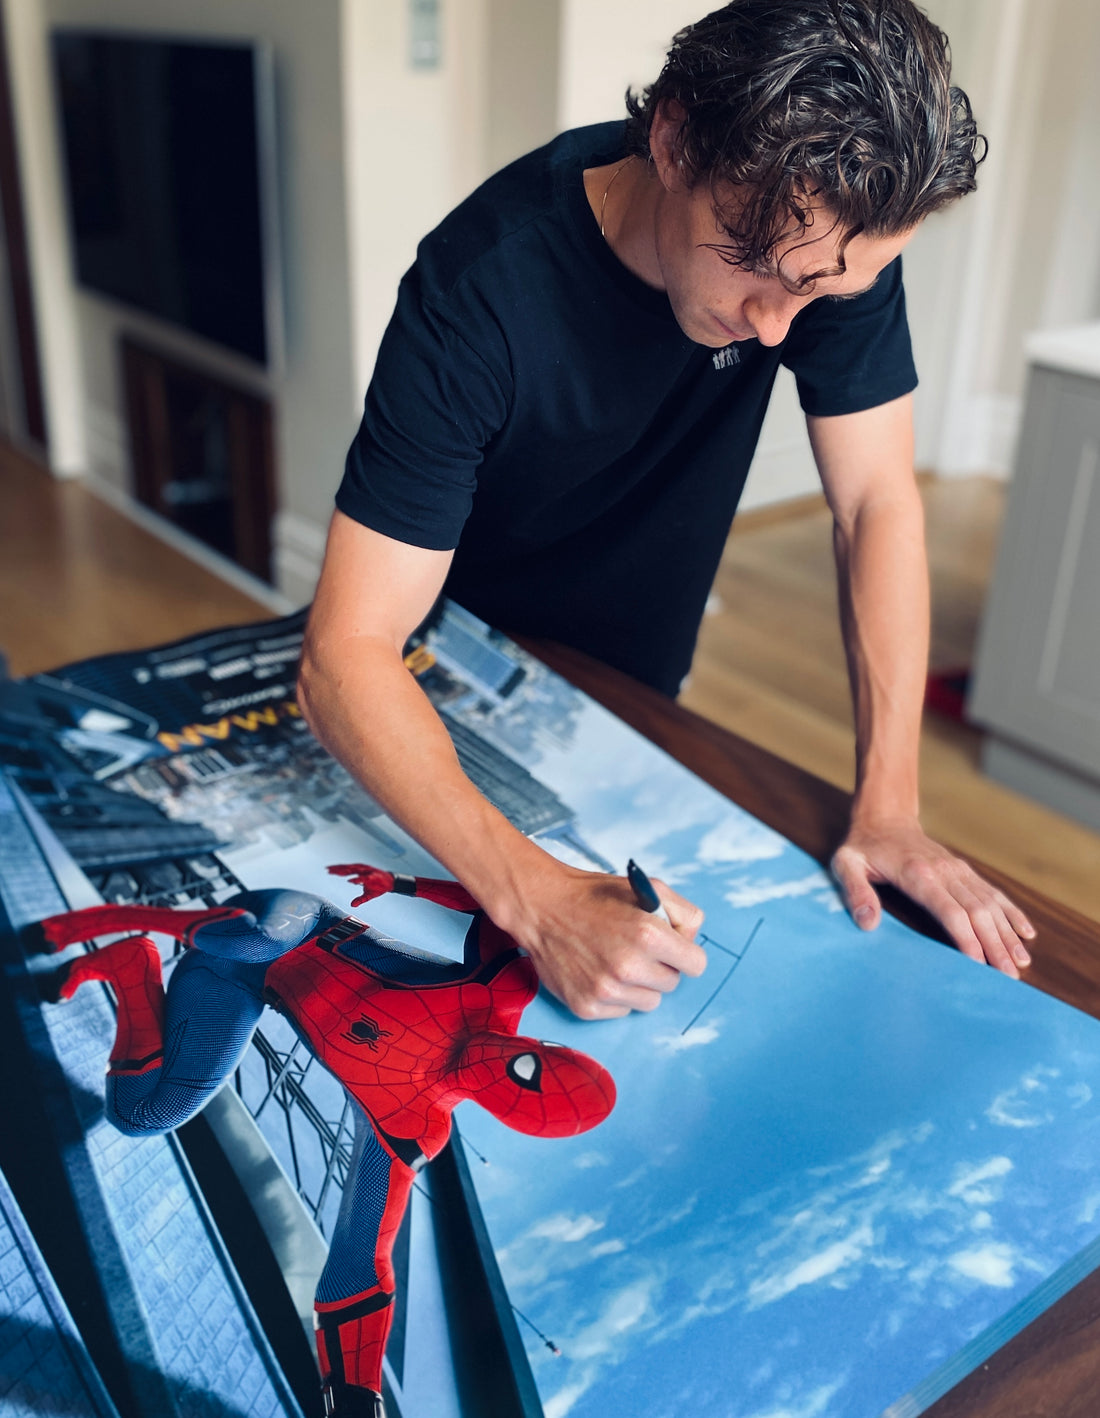 Spider-Man: Homecoming Poster signed by Tom Holland with Certificate of Authentication